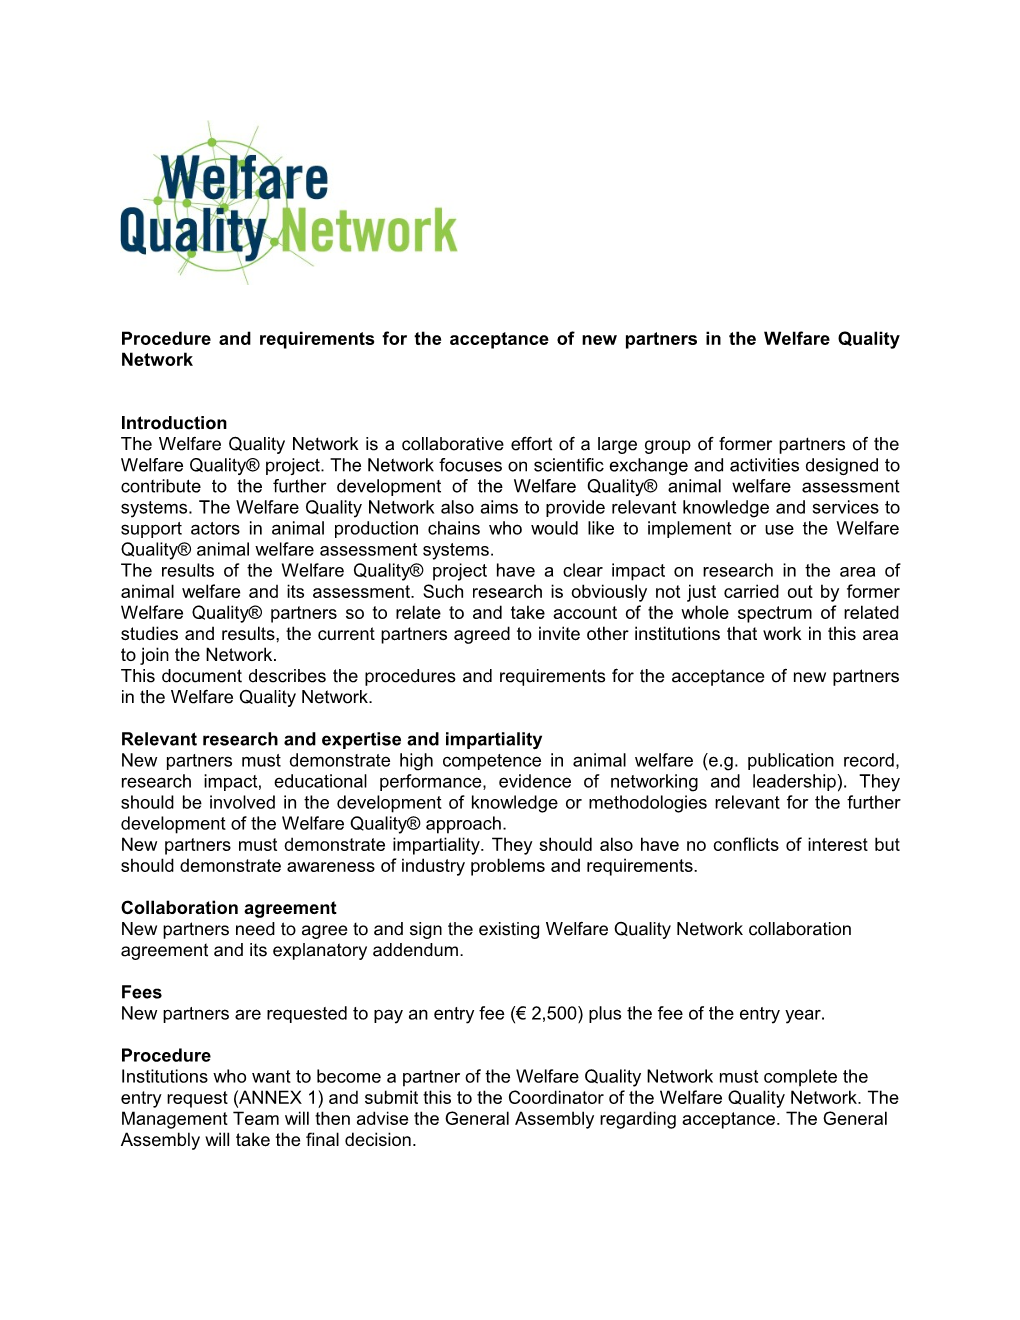 Procedure and Requirements for the Acceptance of New Partners in the Welfare Quality Network